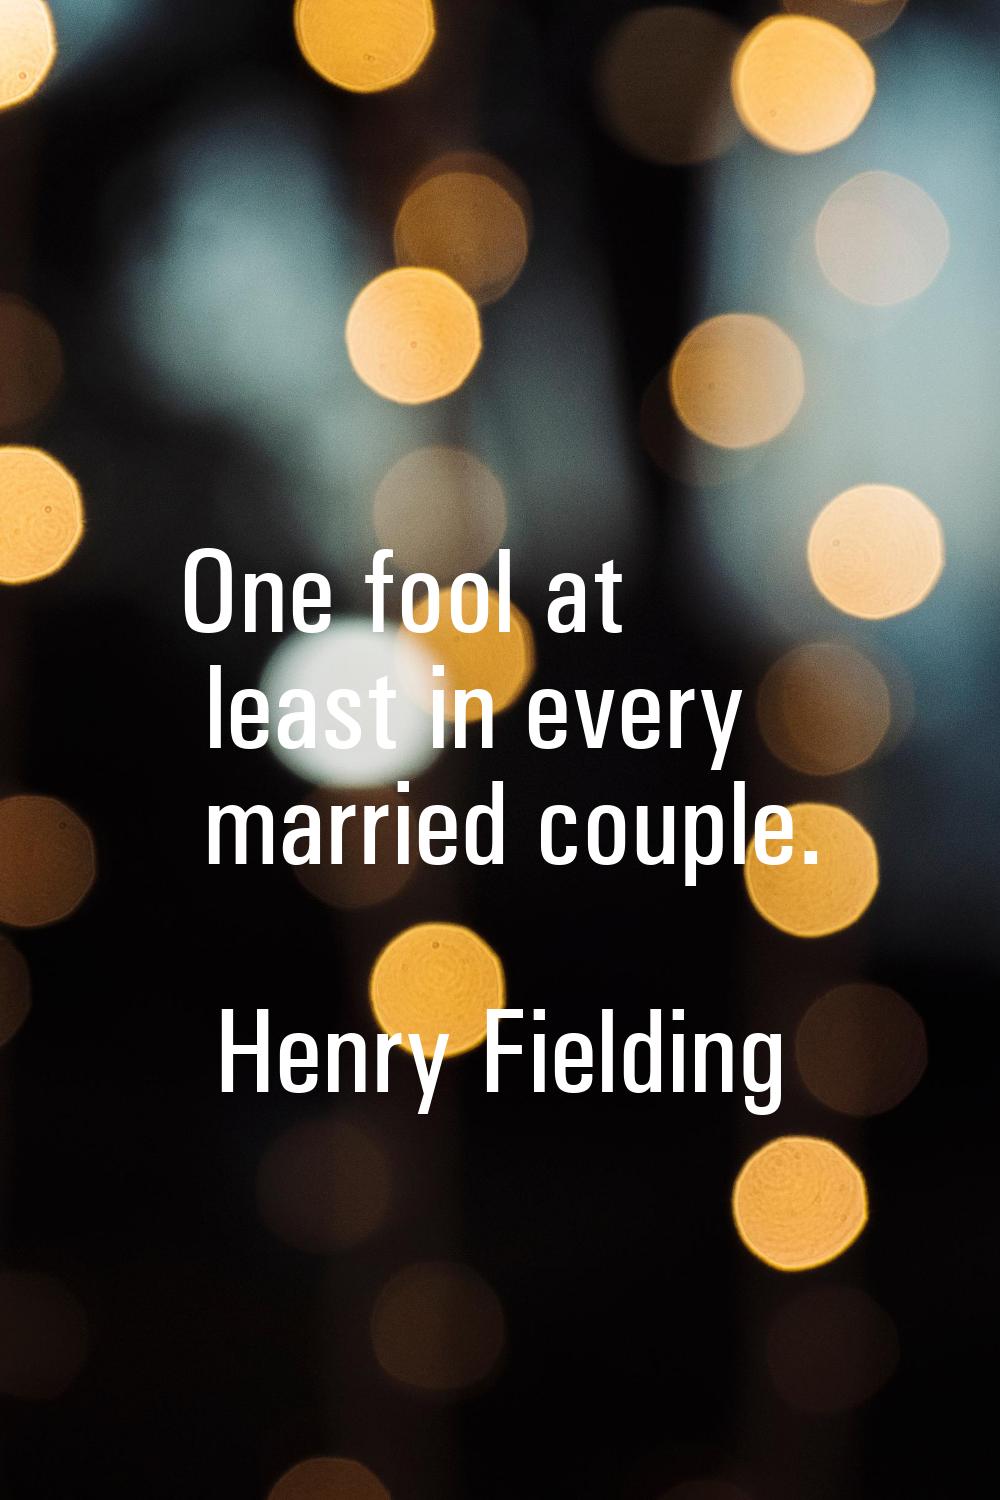 One fool at least in every married couple.